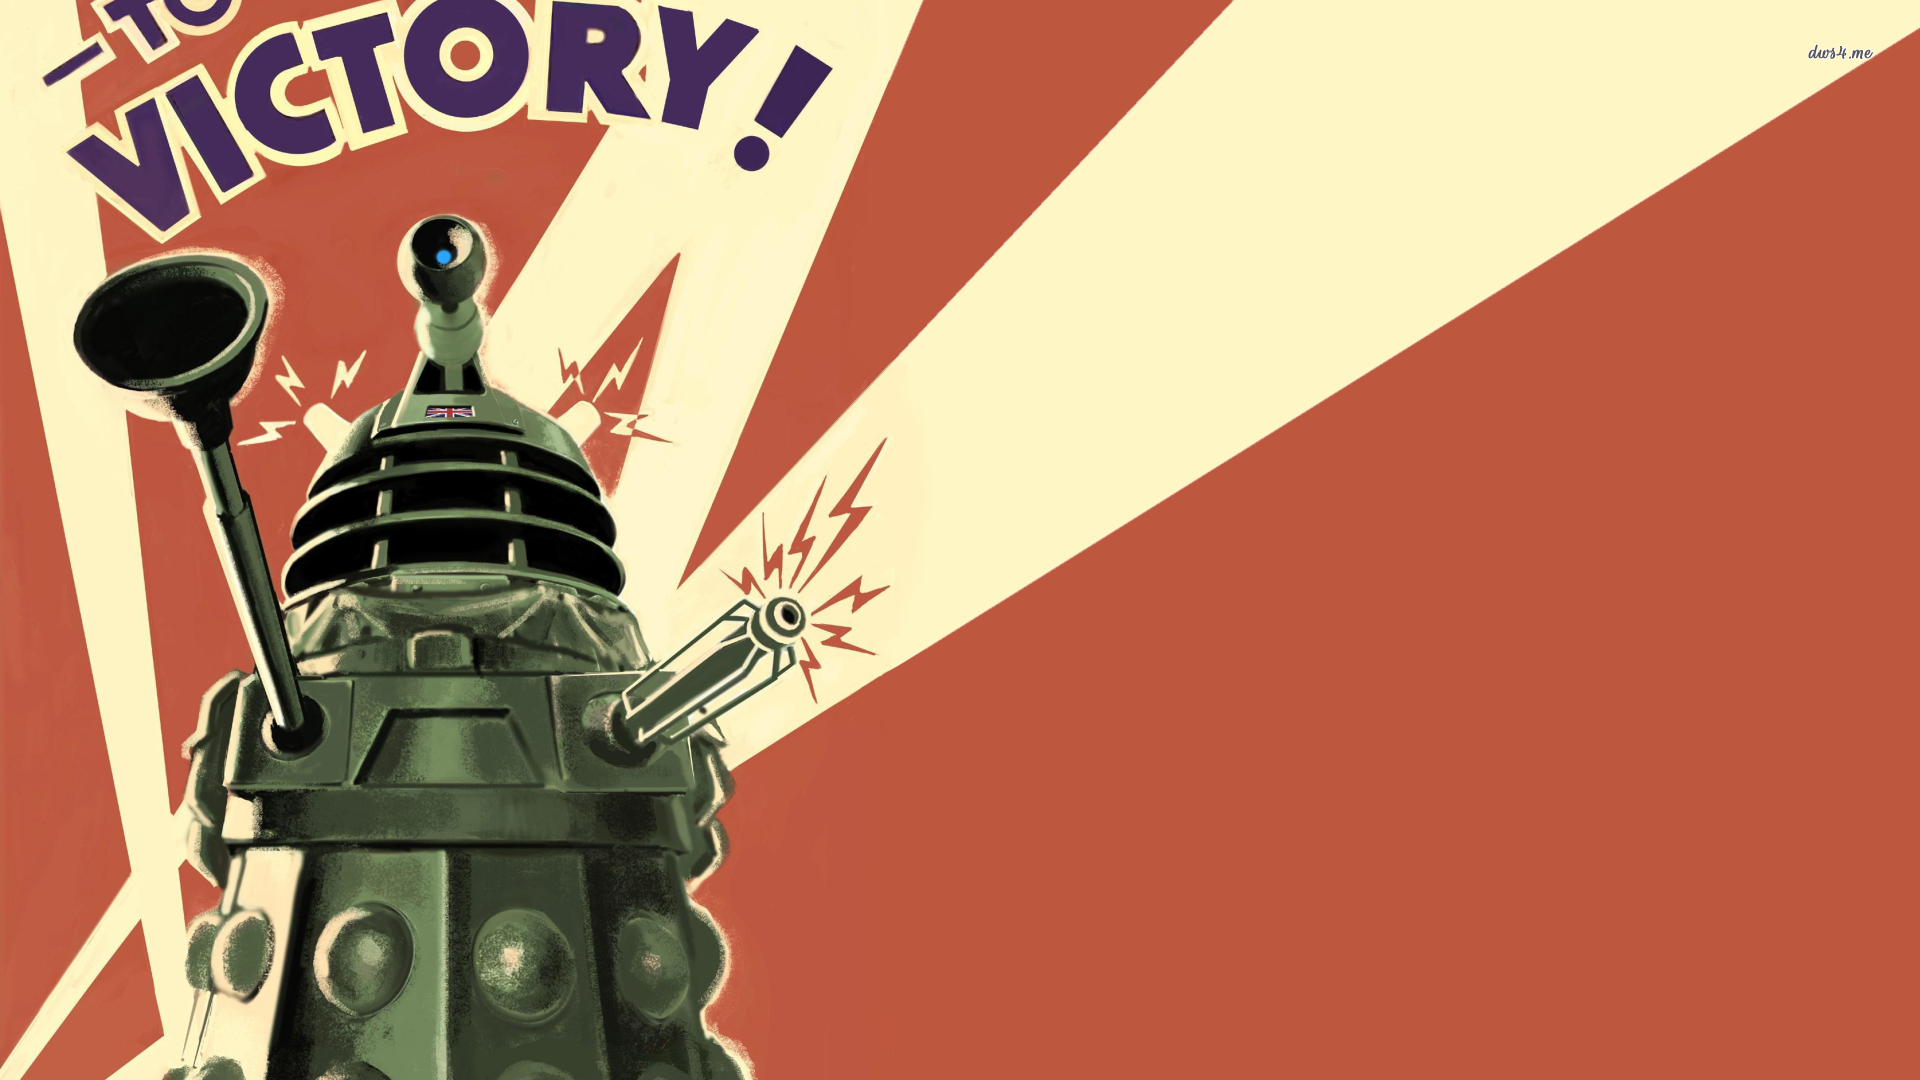 Doctor Who Dalek To Victory - HD Wallpaper 